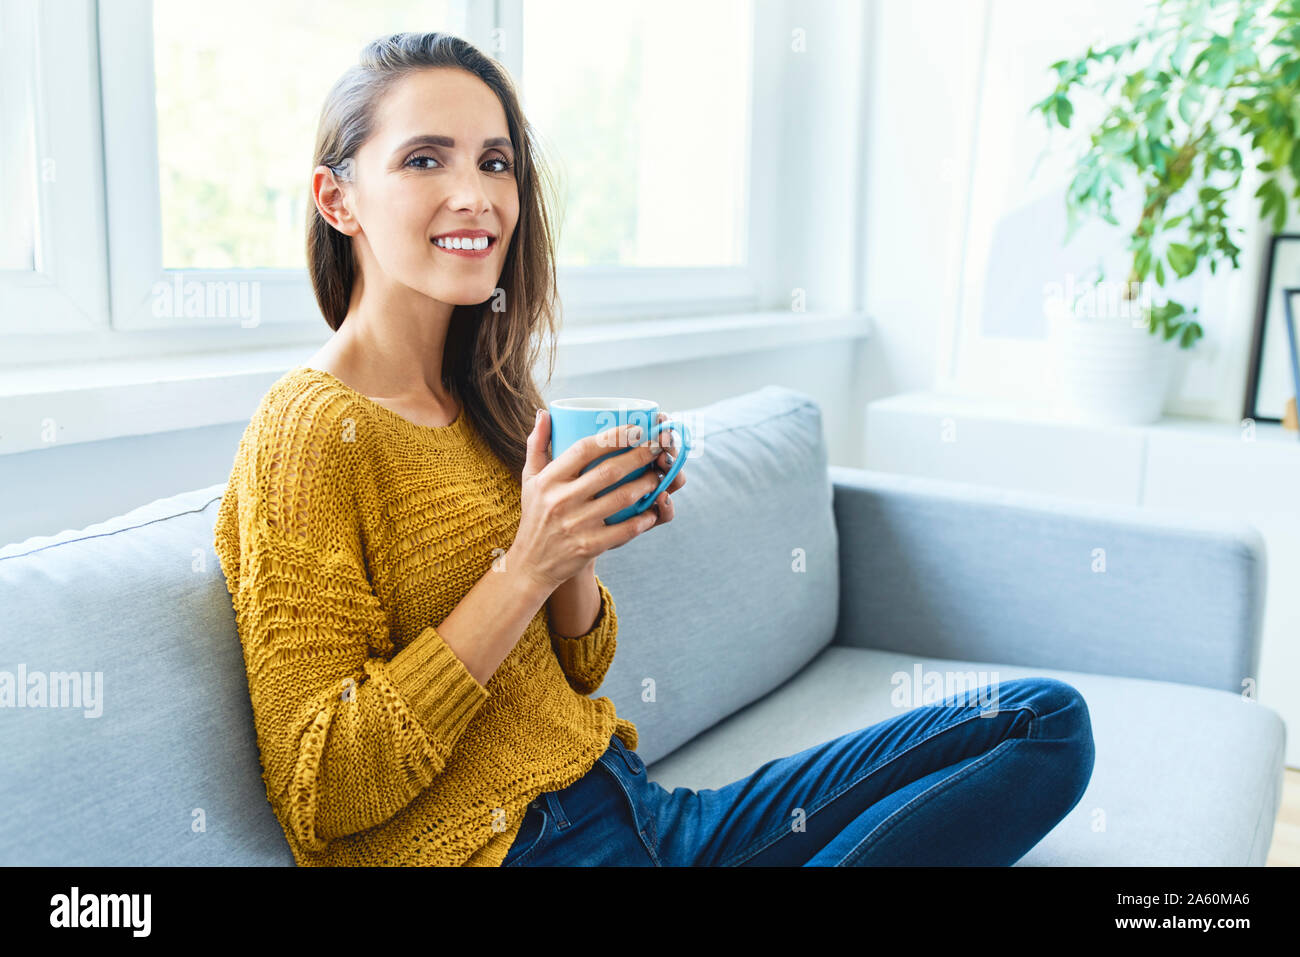 Portrait of young woman drinking coffee sitting on sofa and smiling at camera Stock Photo